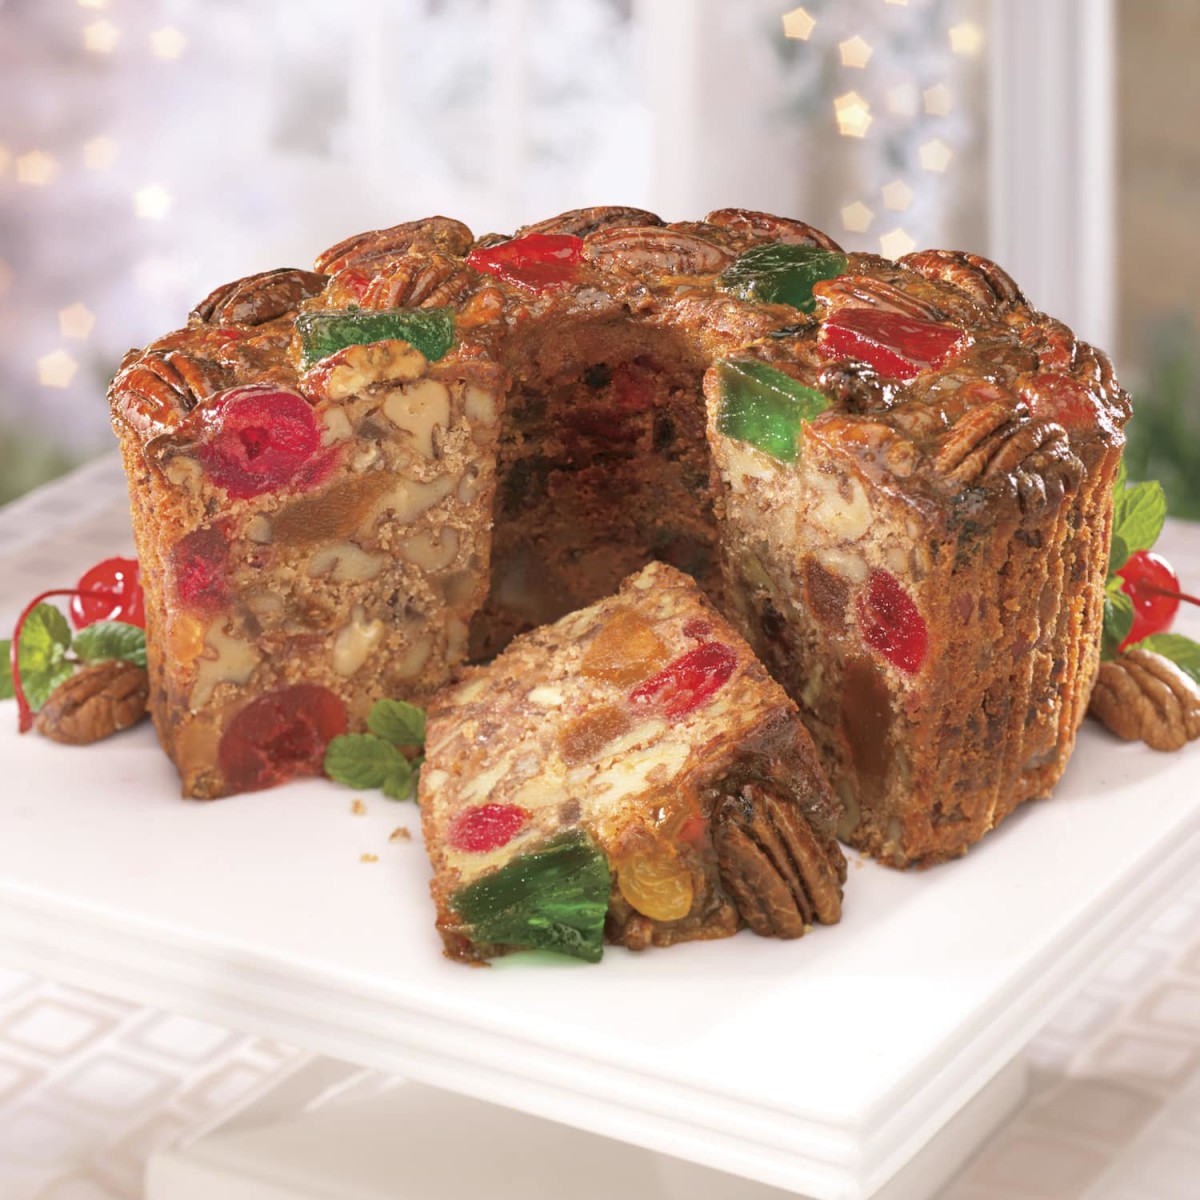 Fruit cakes are filled with nuts and candied fruits.